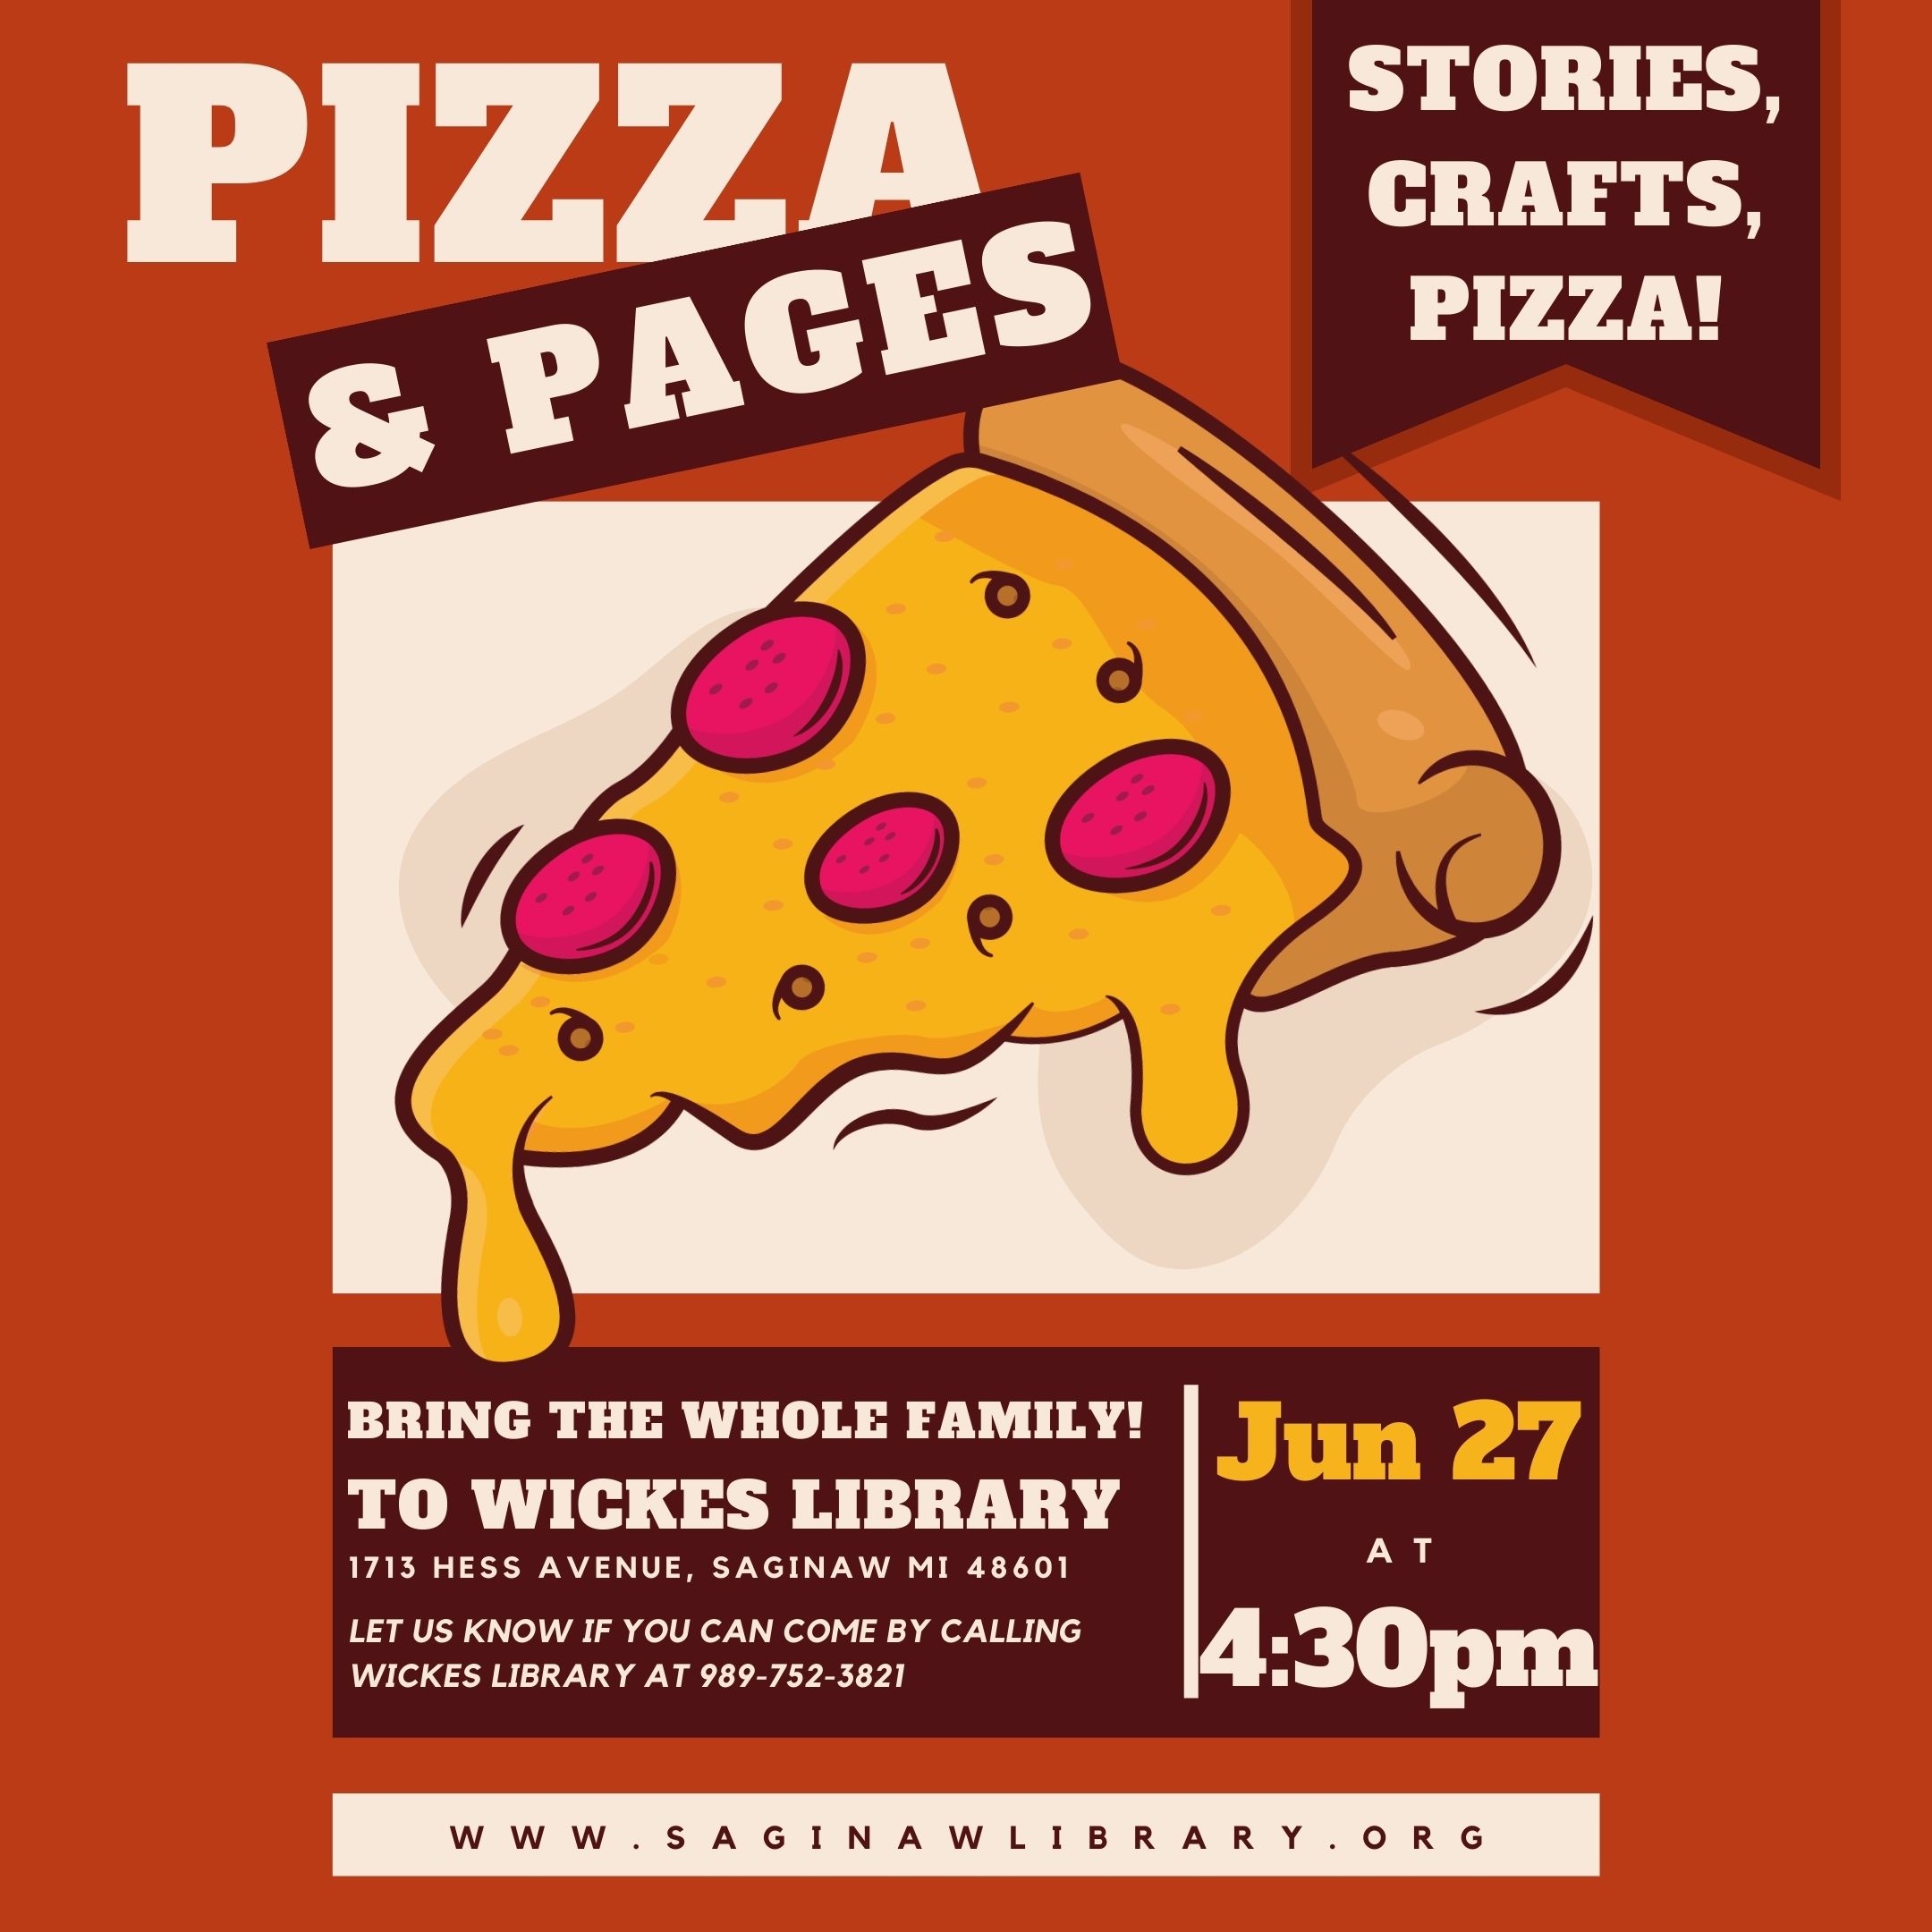 Pizza & Pages: Stories, Crafts, Pizza! June 27 at 4:30 p.m. Please contact Wickes Library to Register